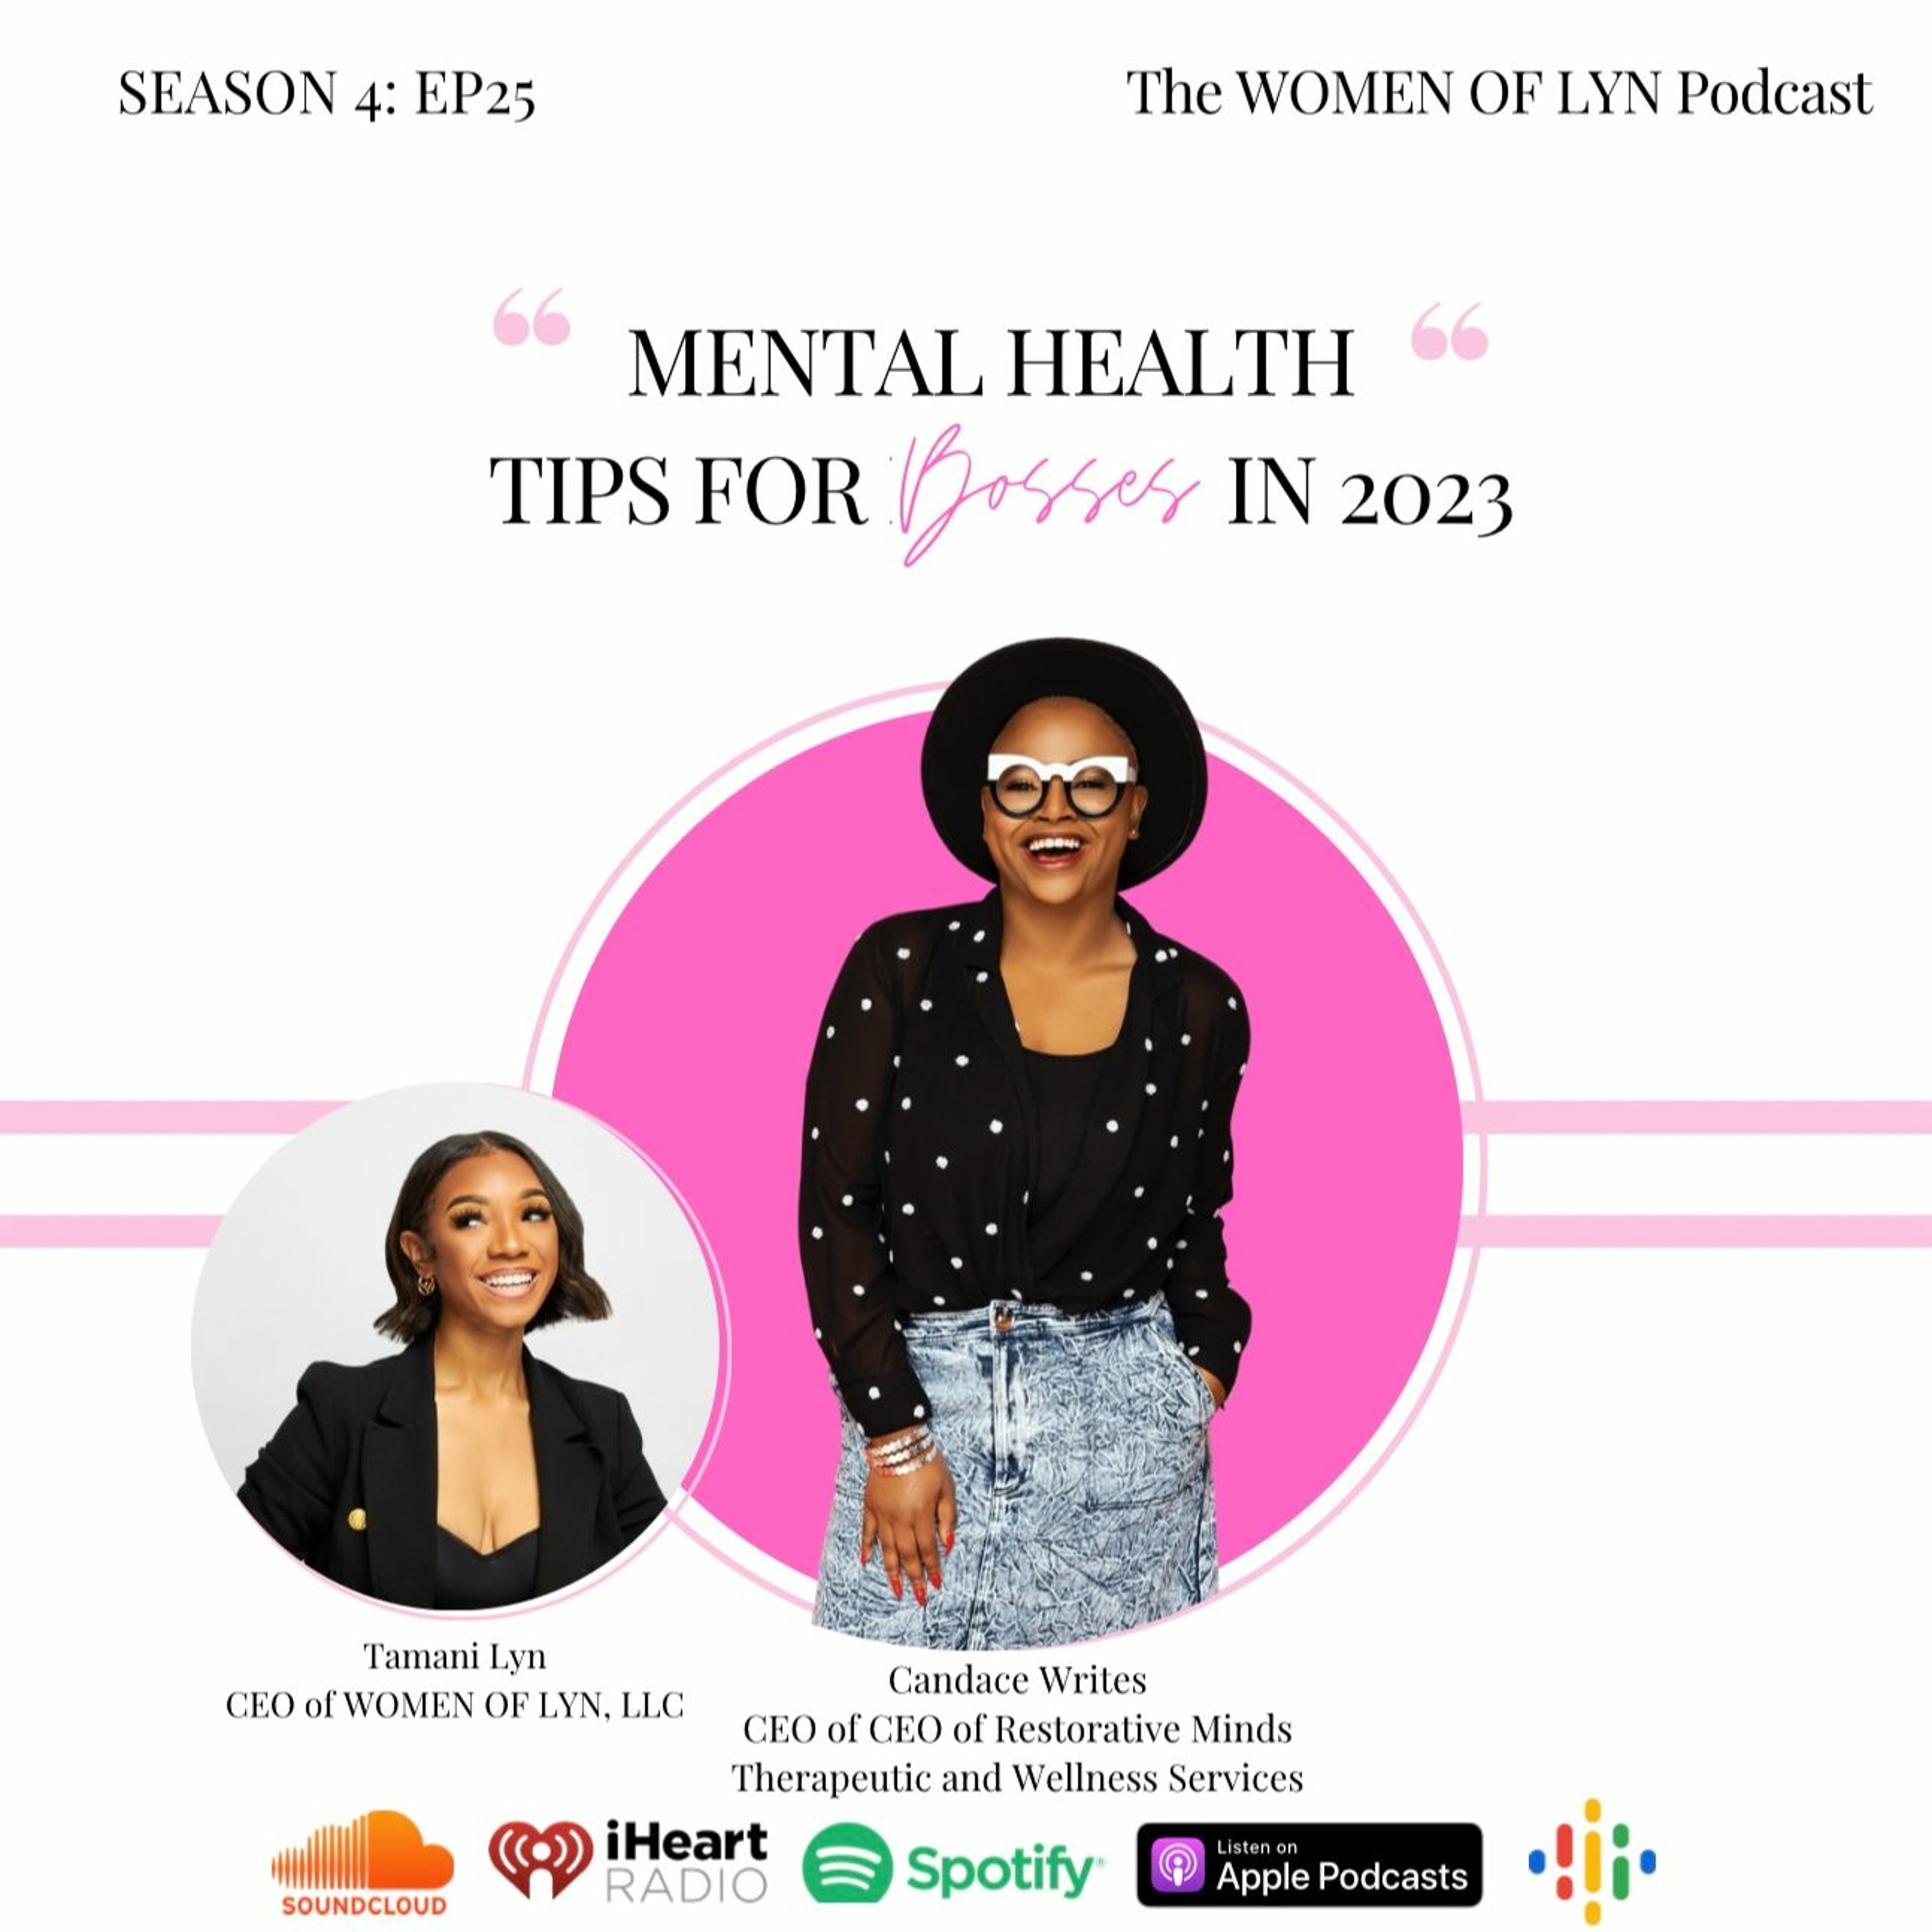 Episode 25: ”Mental Health Tips For Bosses in 2023” Ft. Candace Writes